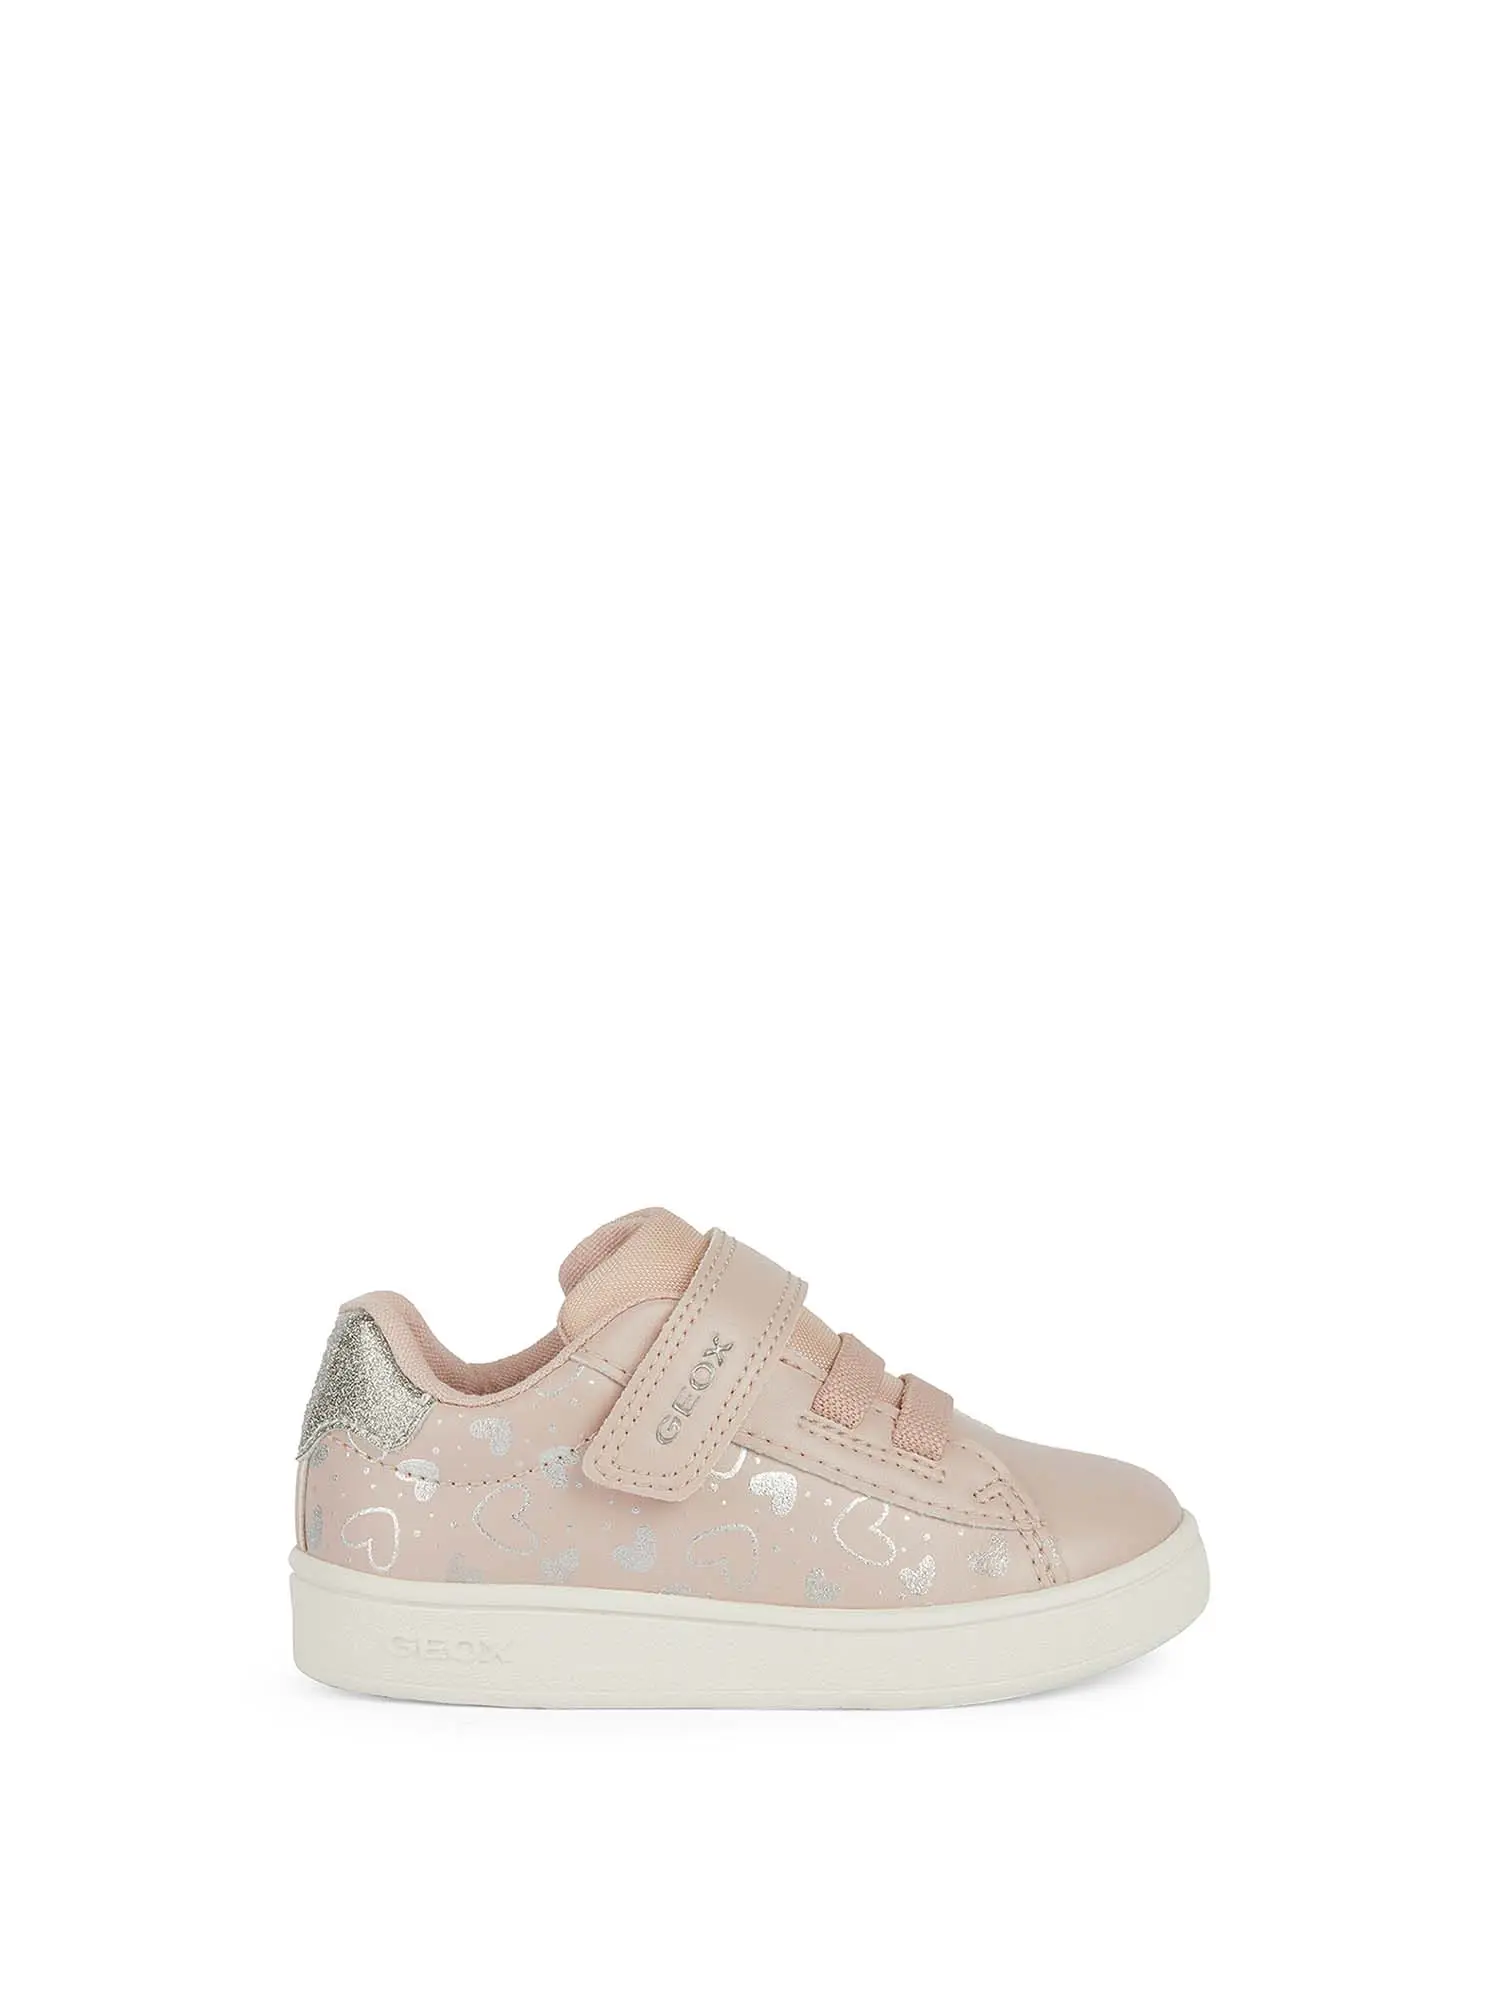 SNEAKERS BAMBINA - GEOX - B455MA 0BCKC - ROSA/ARGENTO, 20